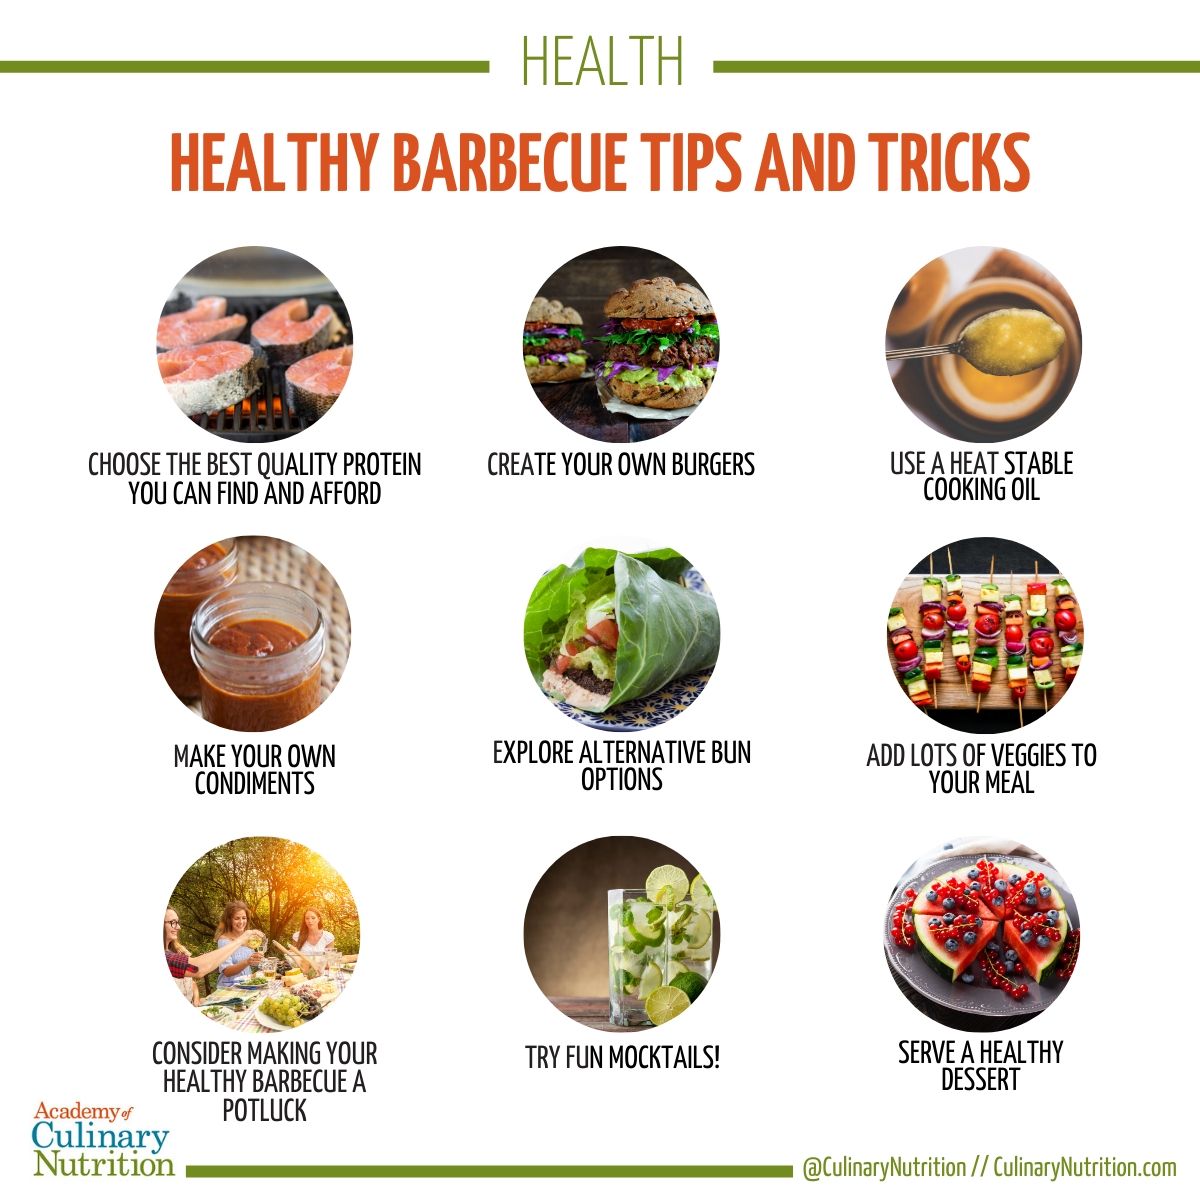 Healthy BBQ tips and tricks